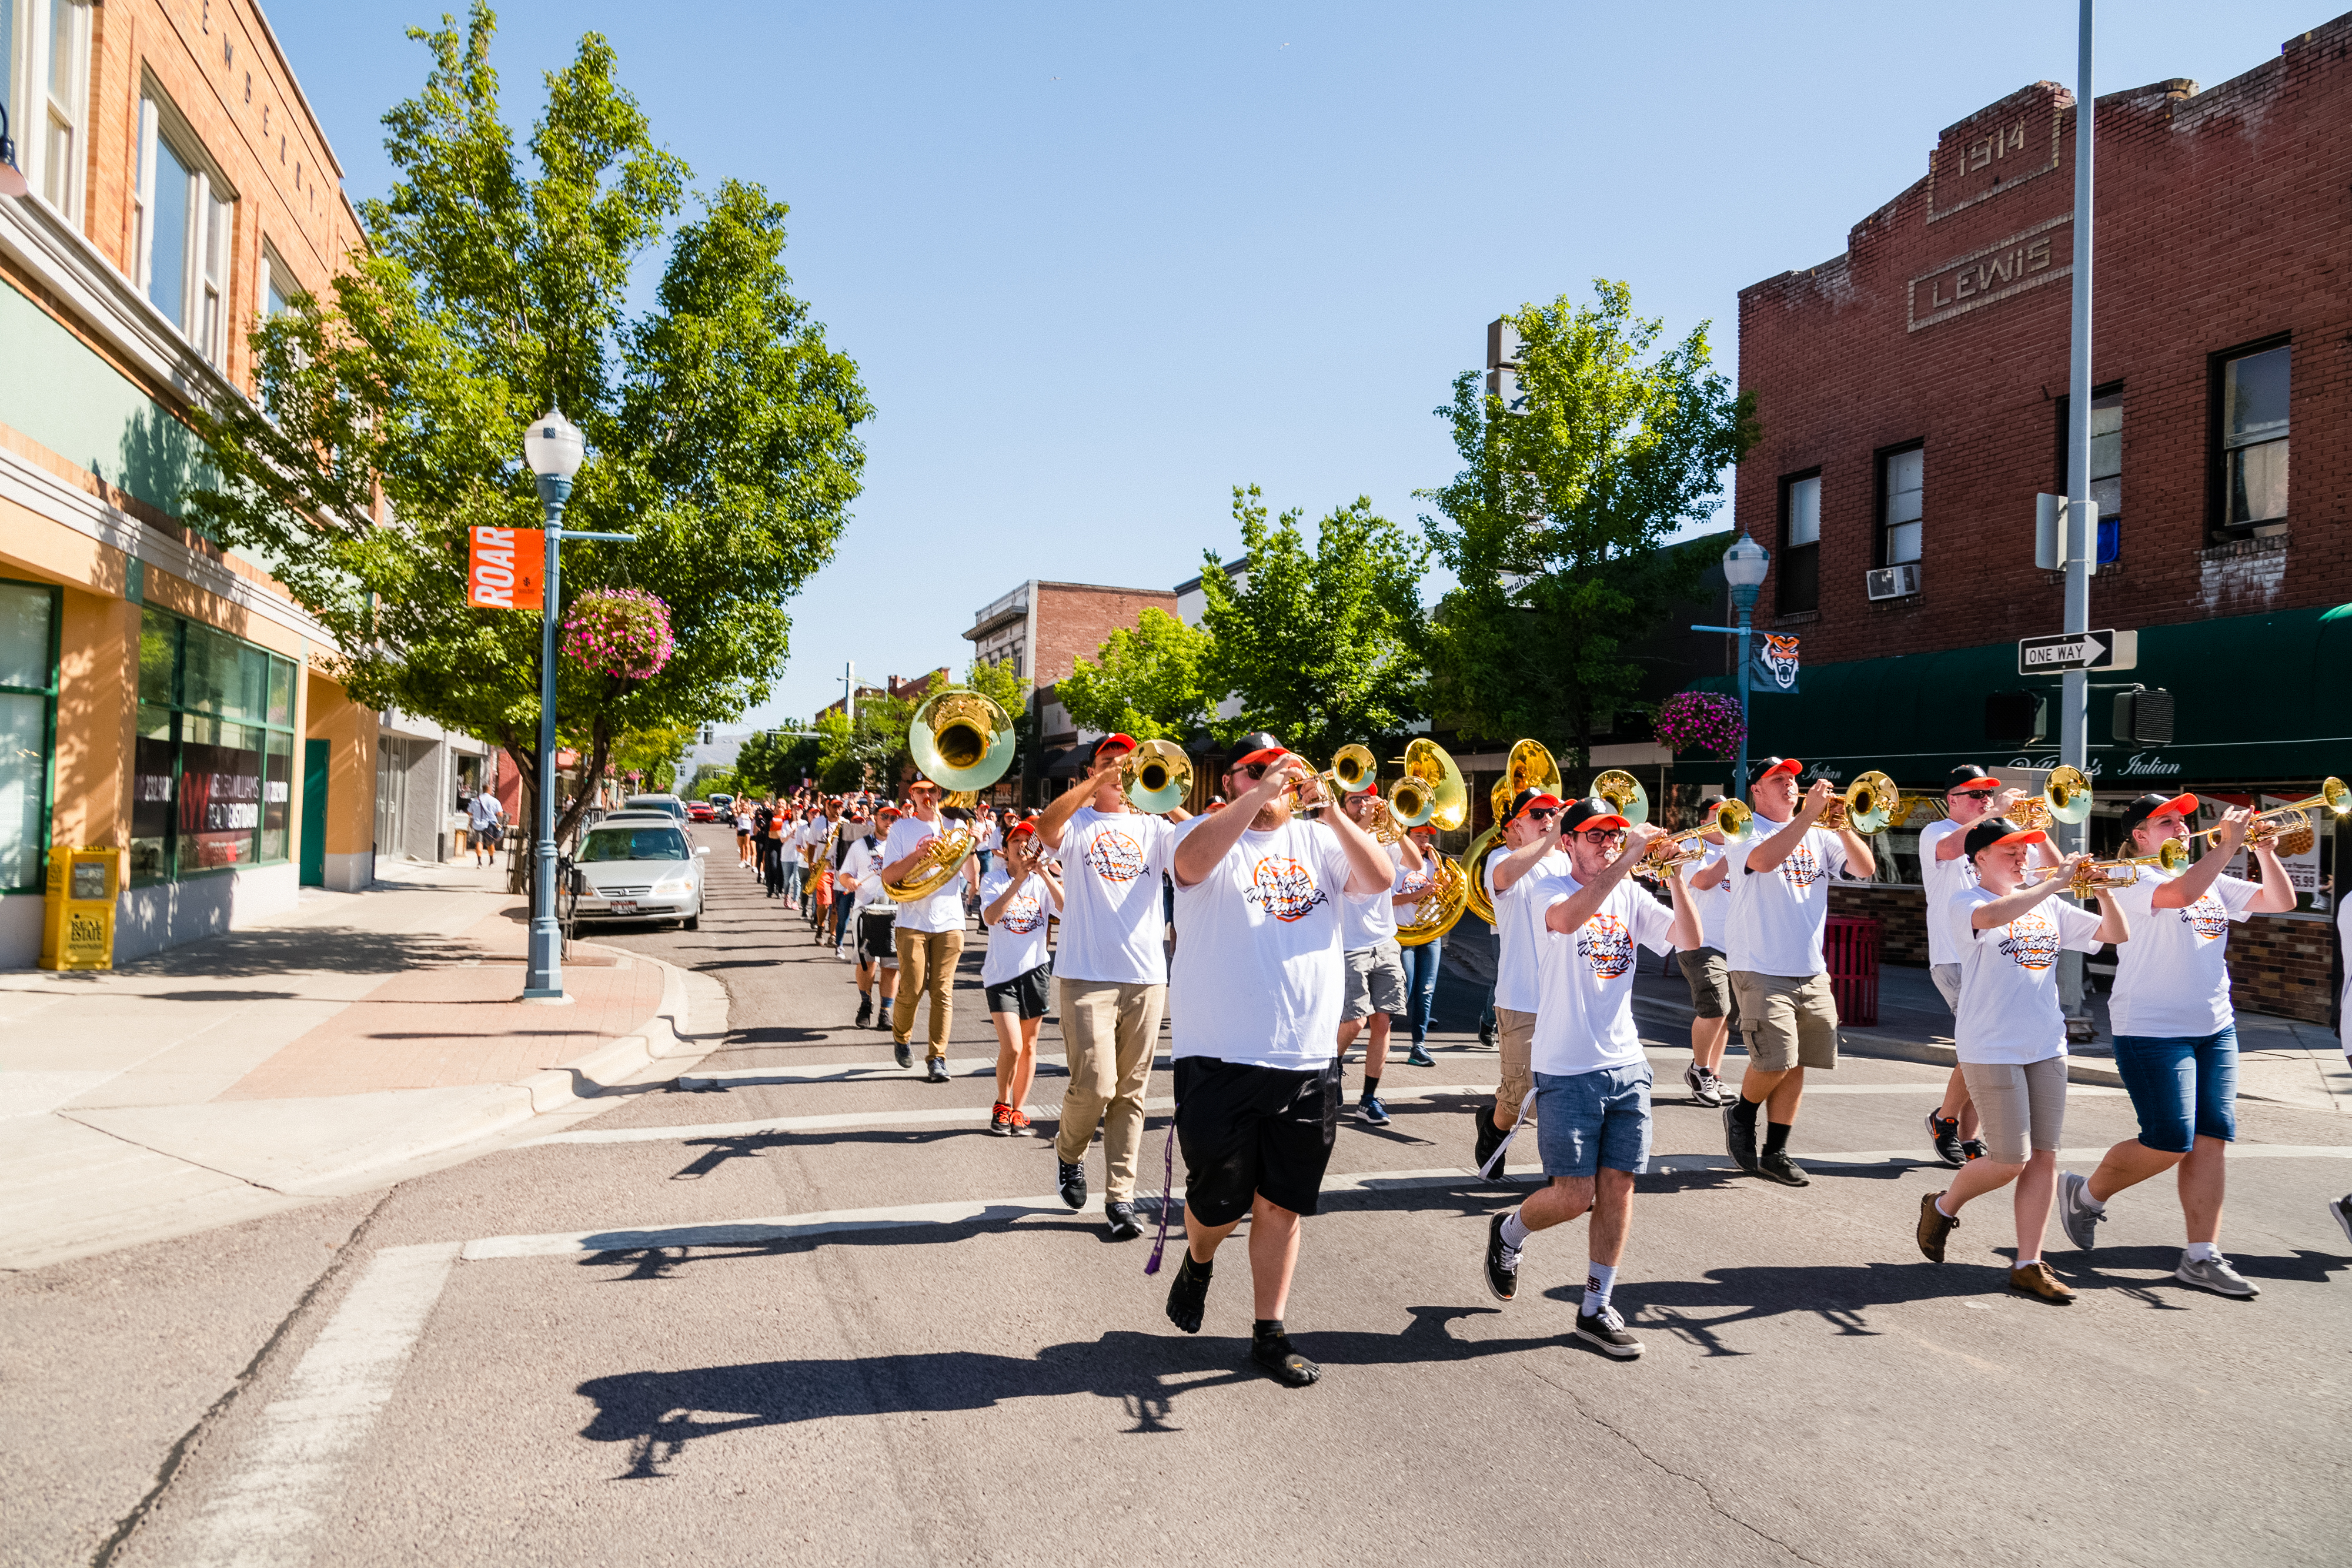 The ISU marching band playing in a parade in Old Town, Pocatello.